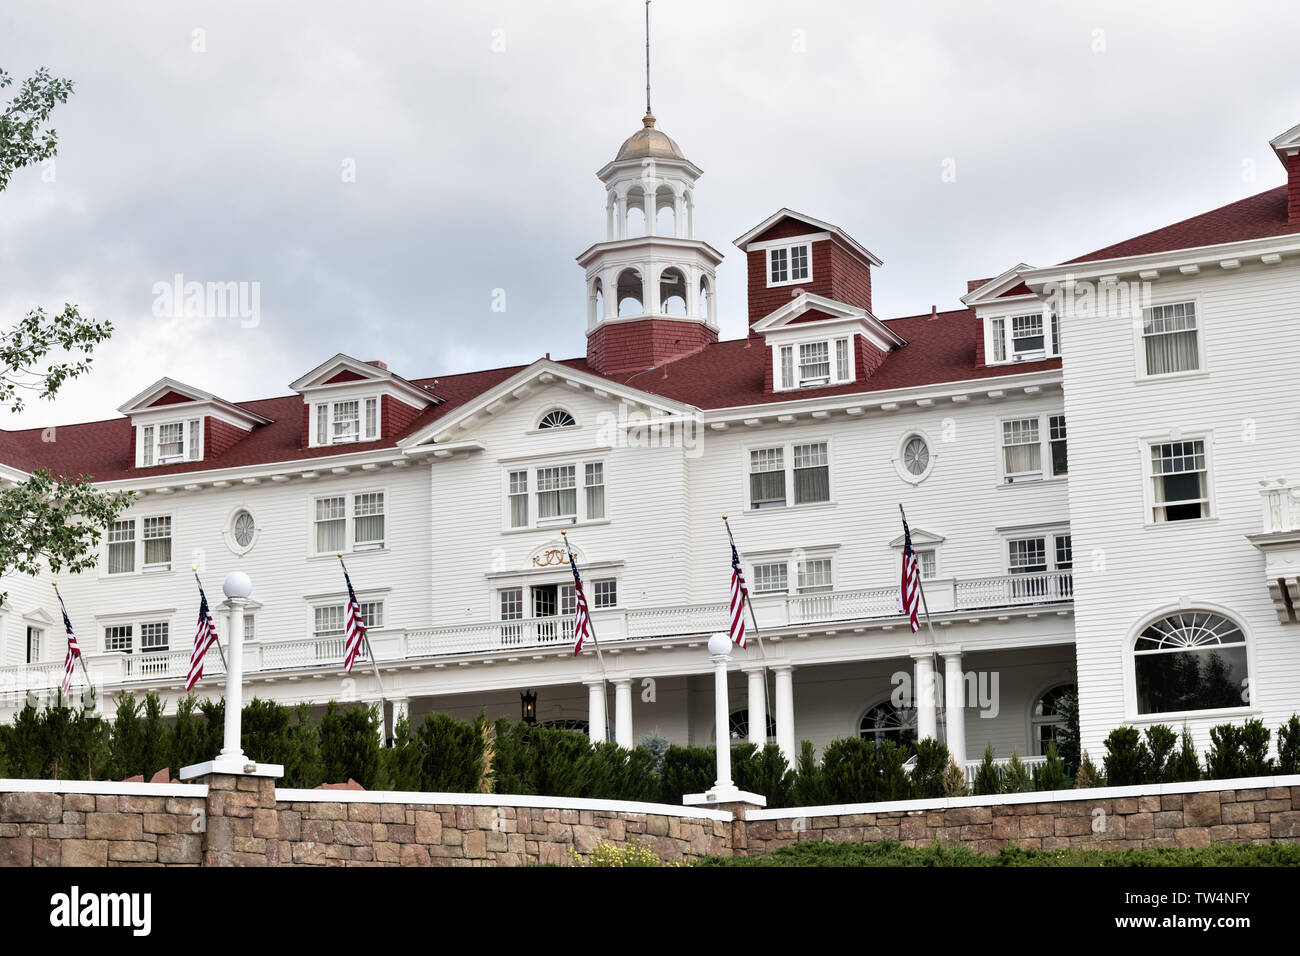 https://c8.alamy.com/comp/TW4NFY/the-historic-stanley-hotel-a-142-room-colonial-revival-hotel-built-in-1909-near-the-entrance-to-rocky-mountain-national-park-in-estes-park-colorado-the-hotel-served-as-the-inspiration-for-the-overlook-hotel-in-the-stephen-king-bestselling-novel-the-shining-TW4NFY.jpg